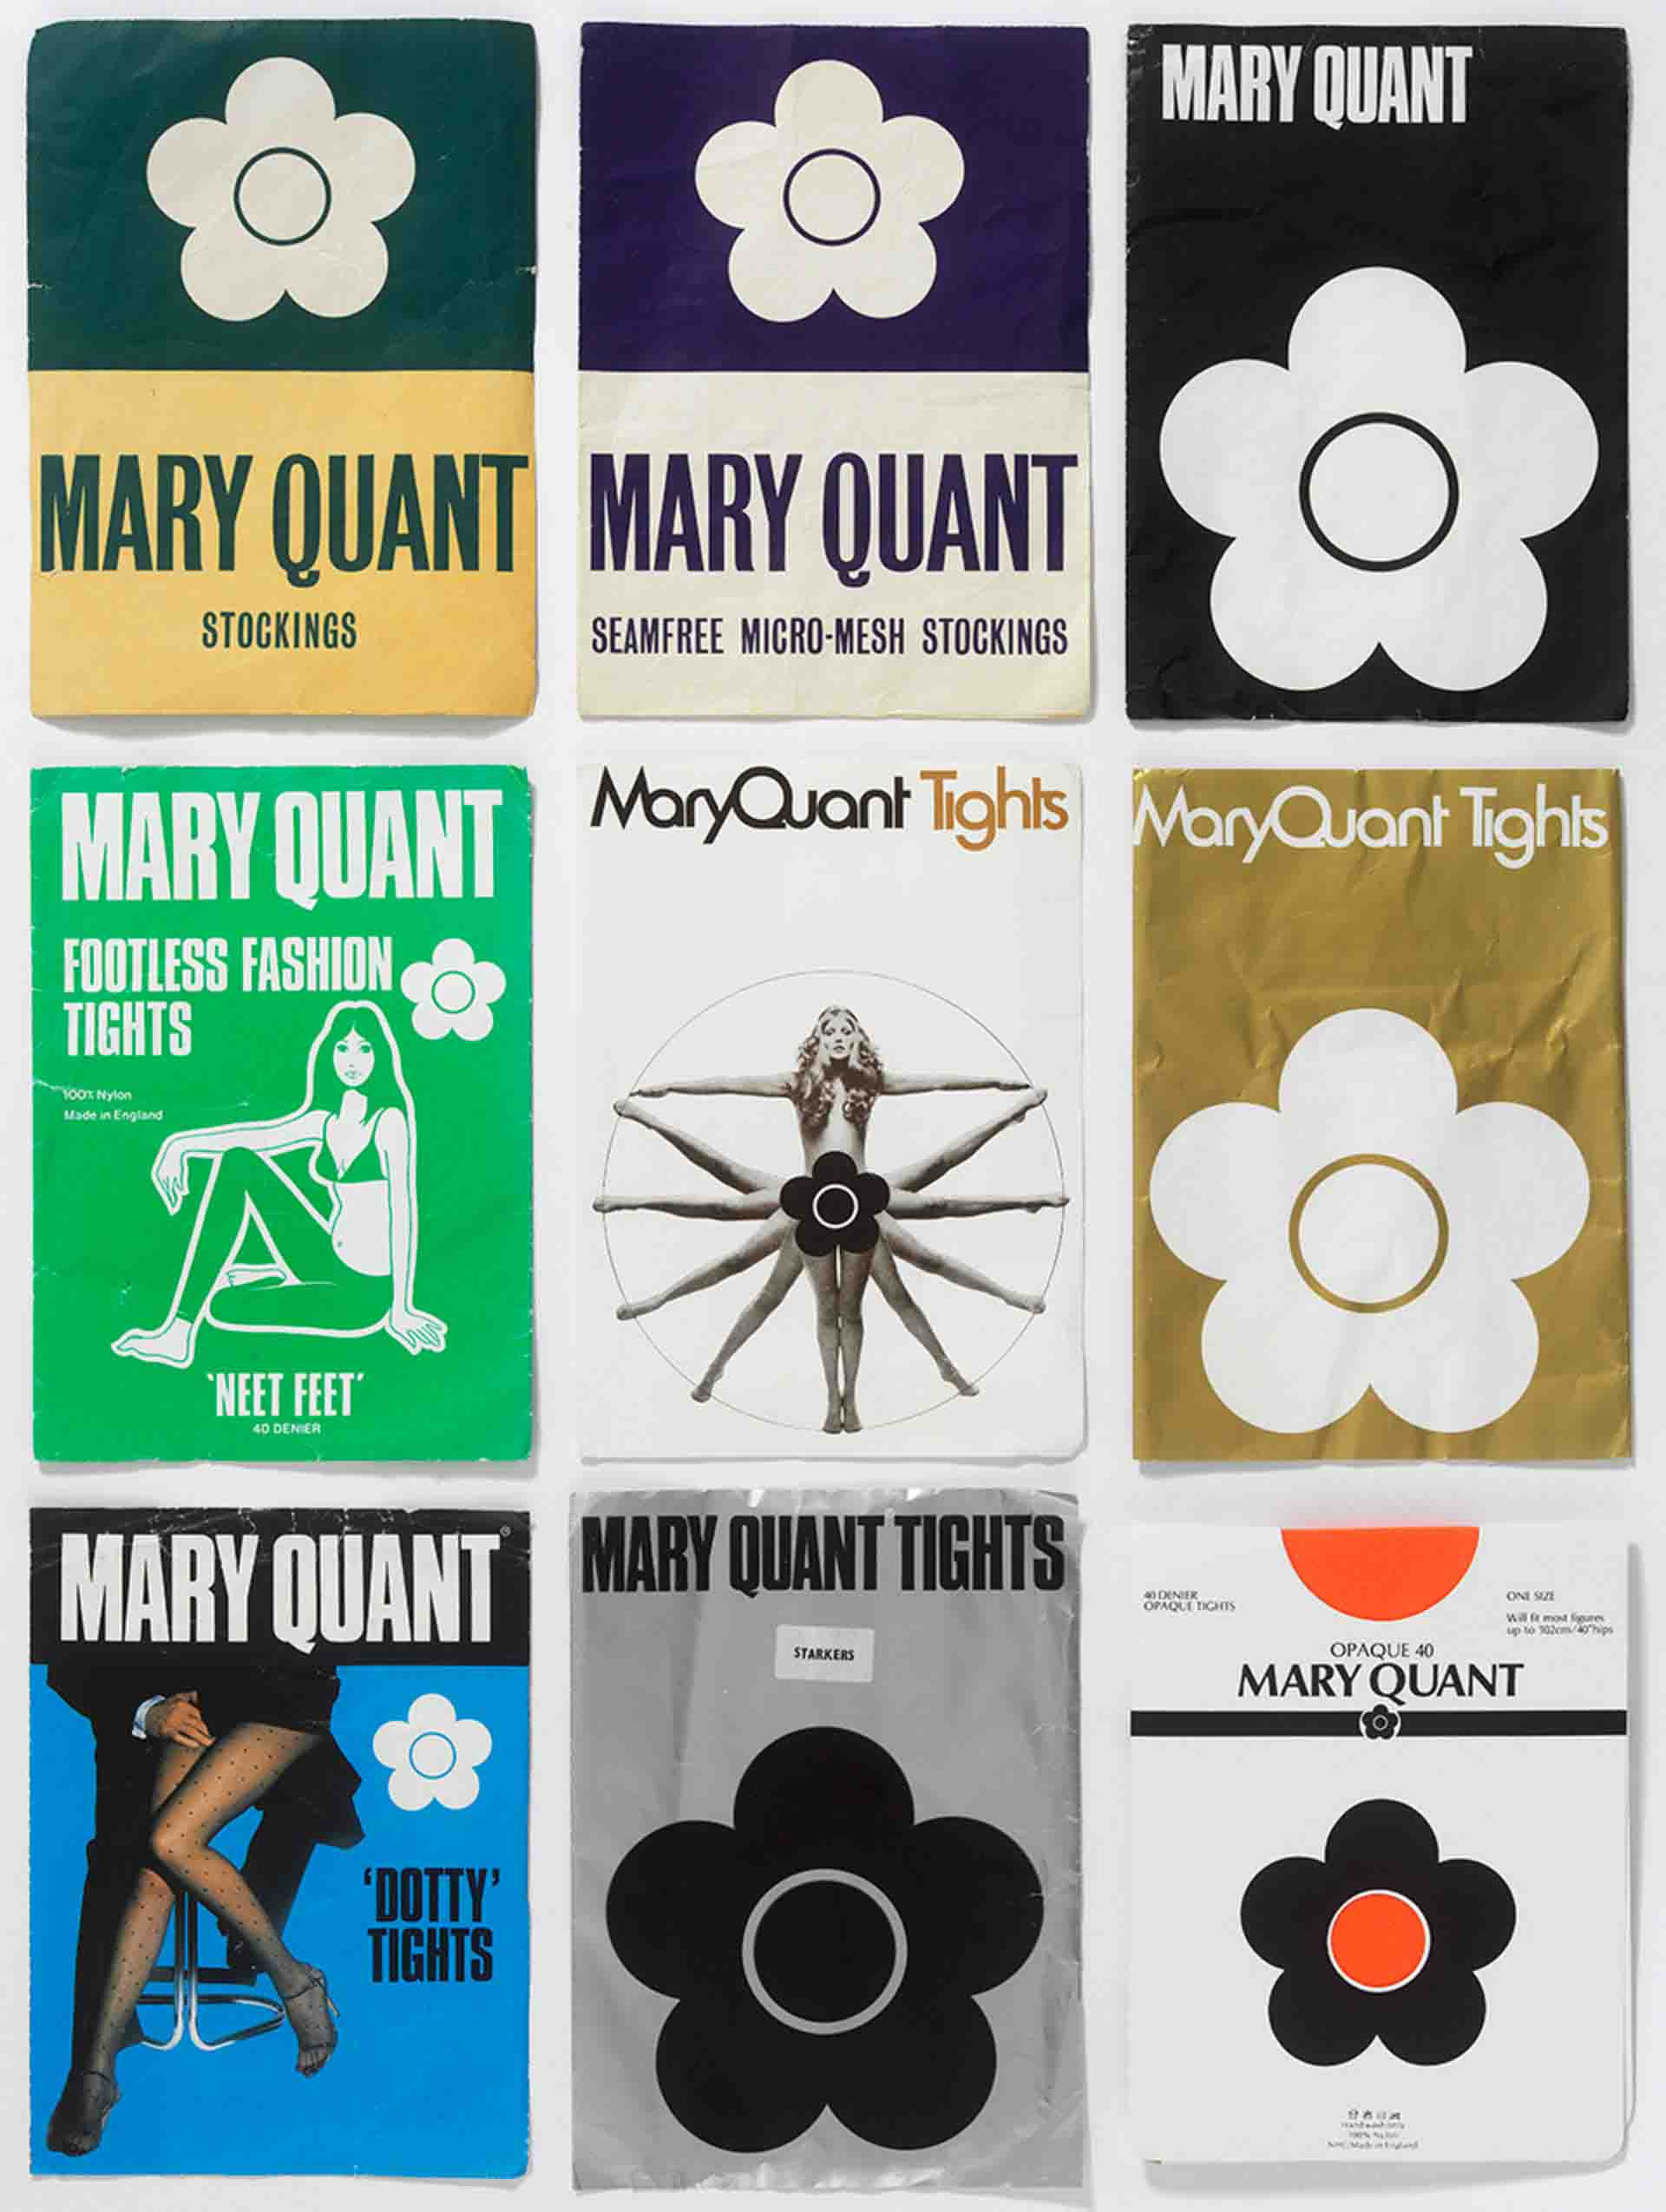 Original packaging of Mary Quant Tights